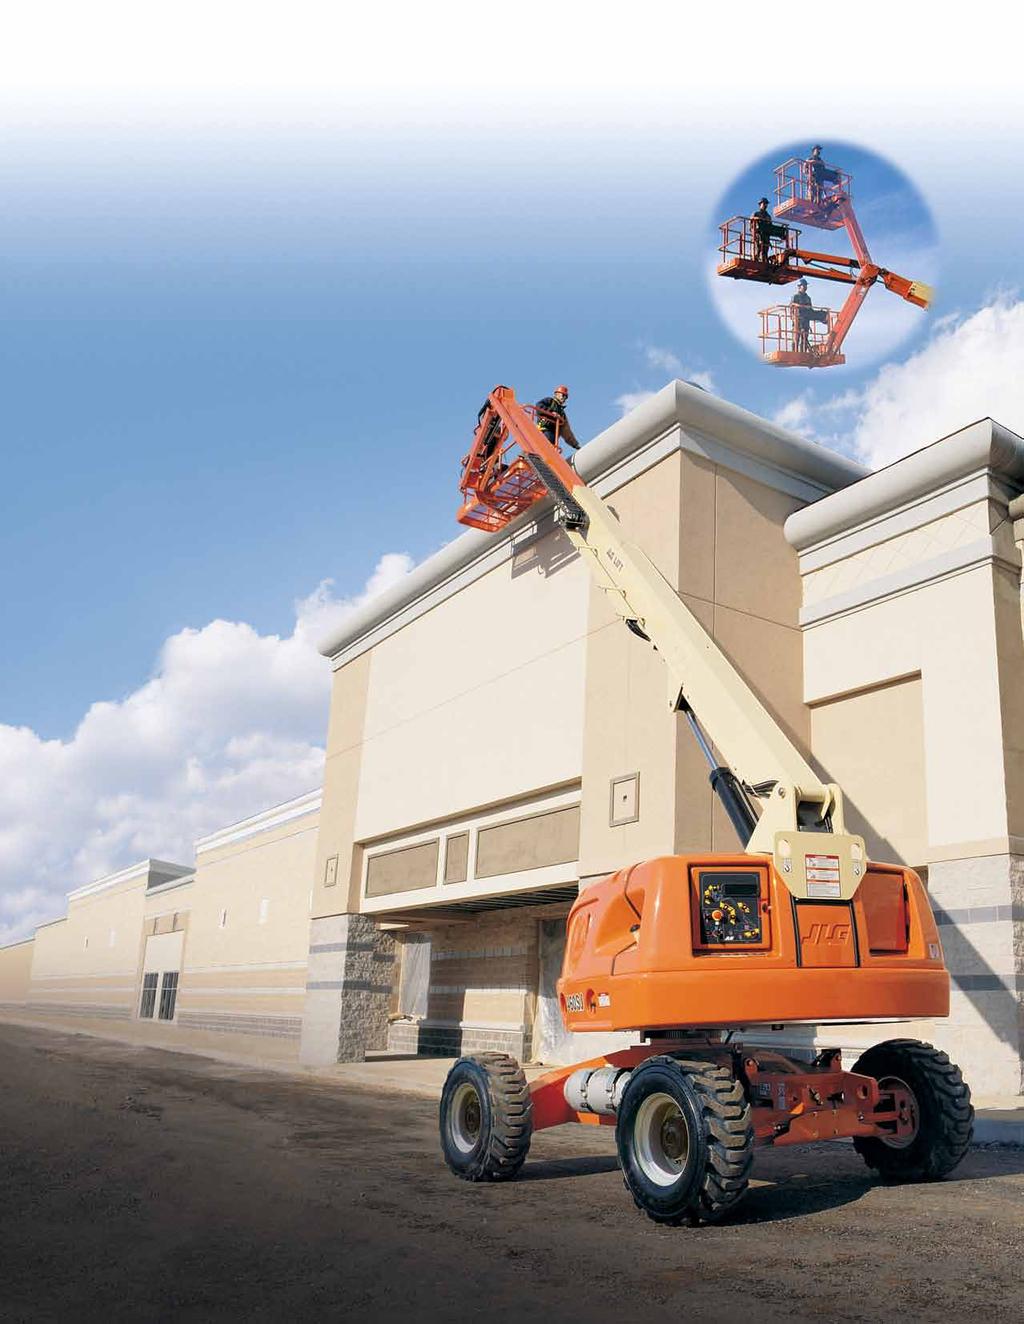 400 Series Telescopic Boom Lifts The Fastest Lift and Drive Speeds in Their Class. Experience a productivity boost with the 400 Series.